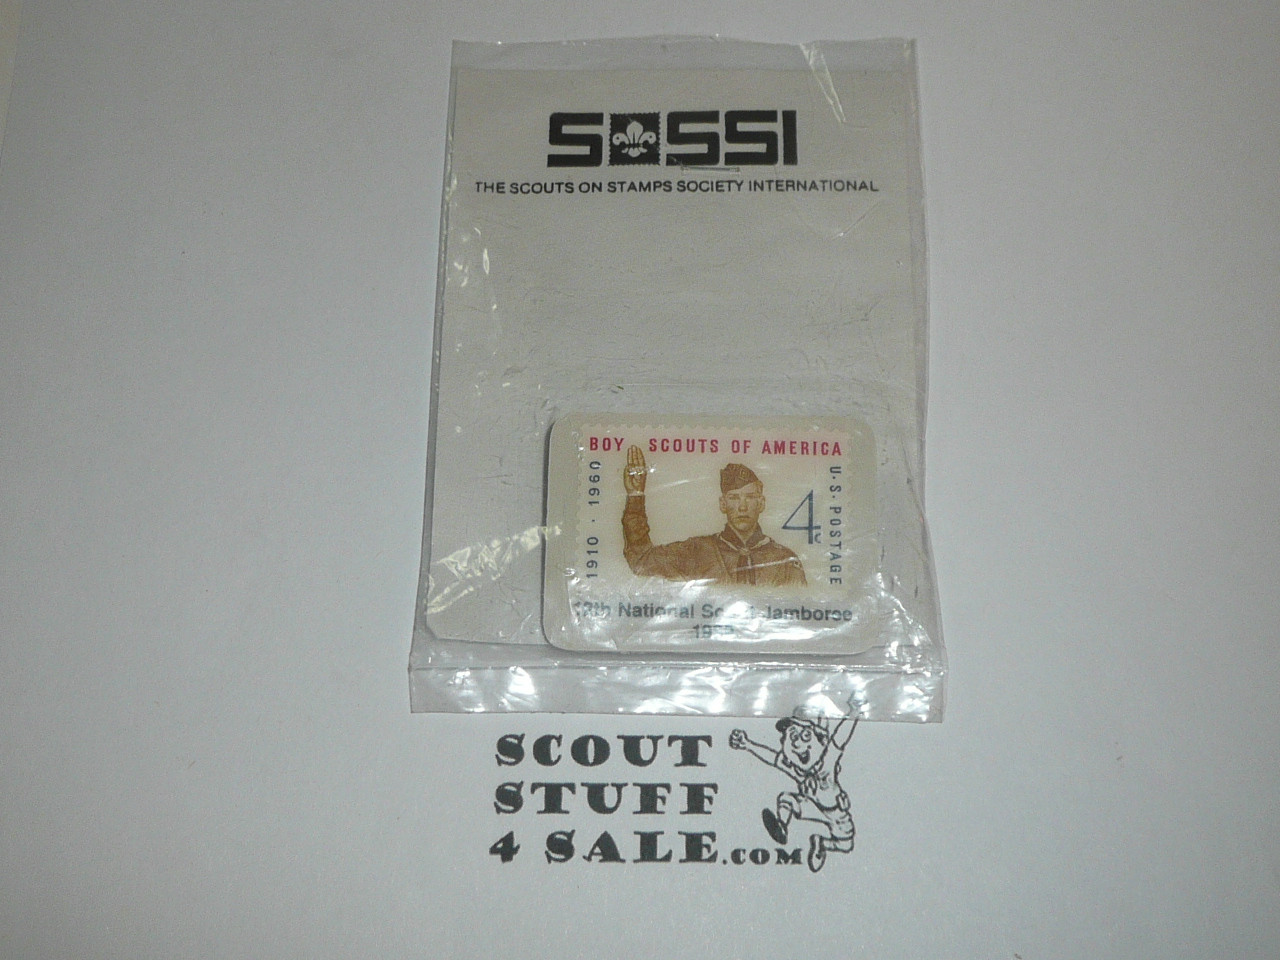 1989 National Jamboree Scouts on Stamps Society (SOSSI) Pin with BSA 4 cent Stamp